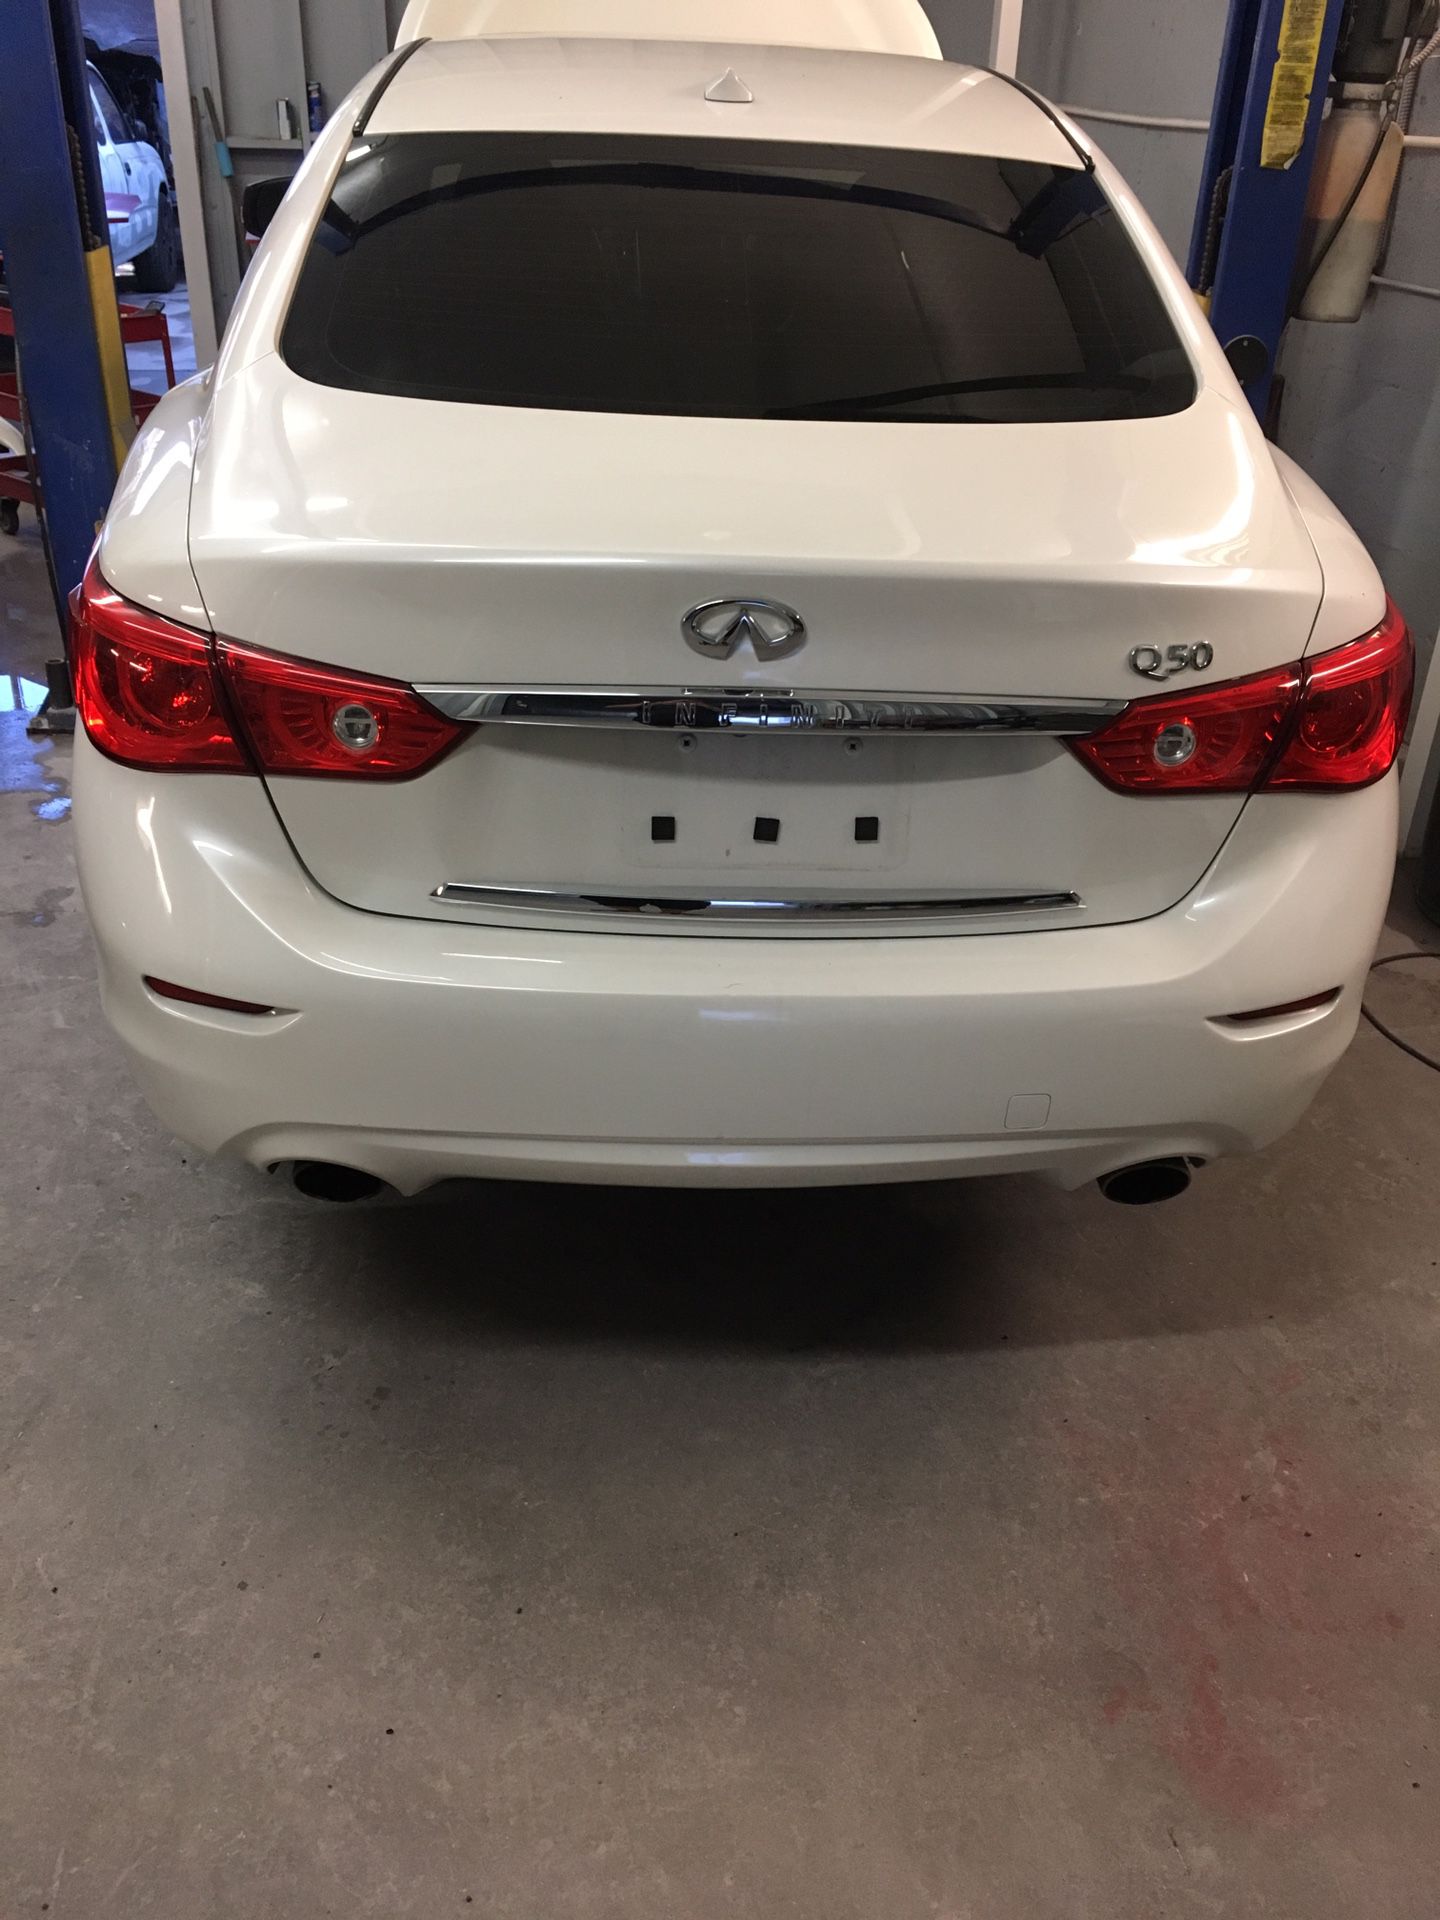 Q50 infinity 2.0t parts only 2016 Q50